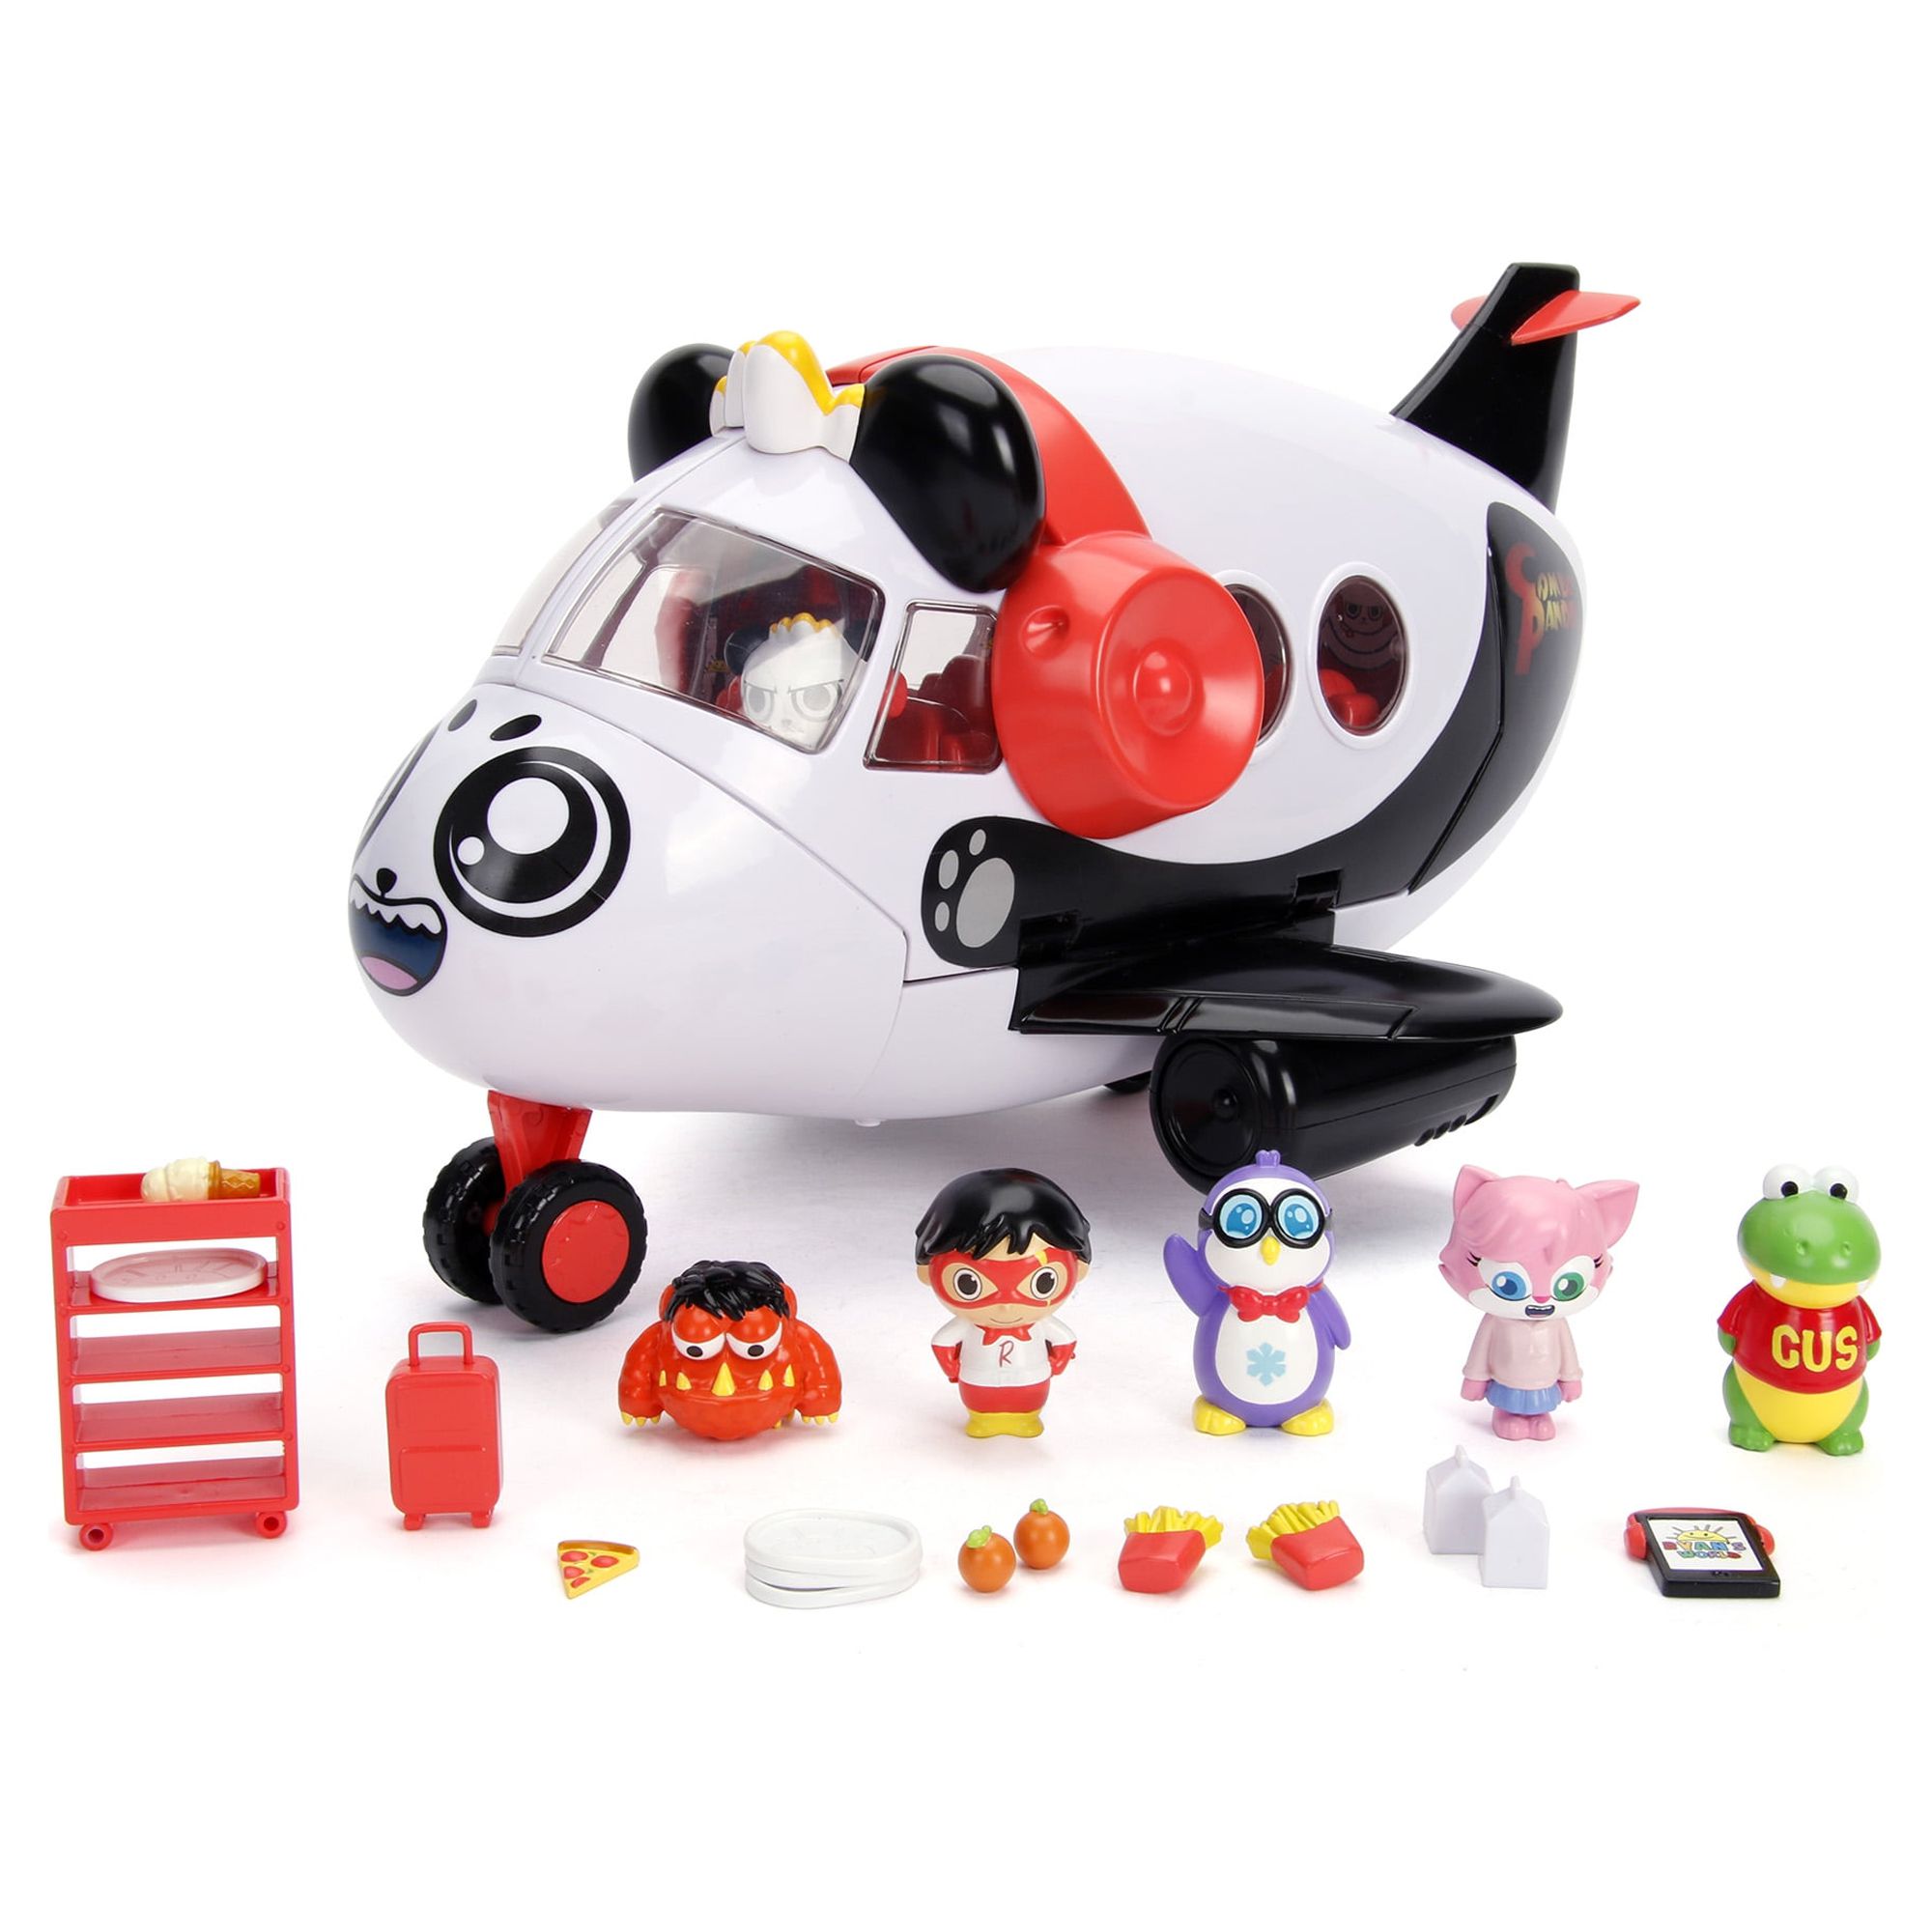 Jada Toys Ryan's World Multi-color Panda Airplane Set with 6 Figures, for Children 3+ Years - image 1 of 2